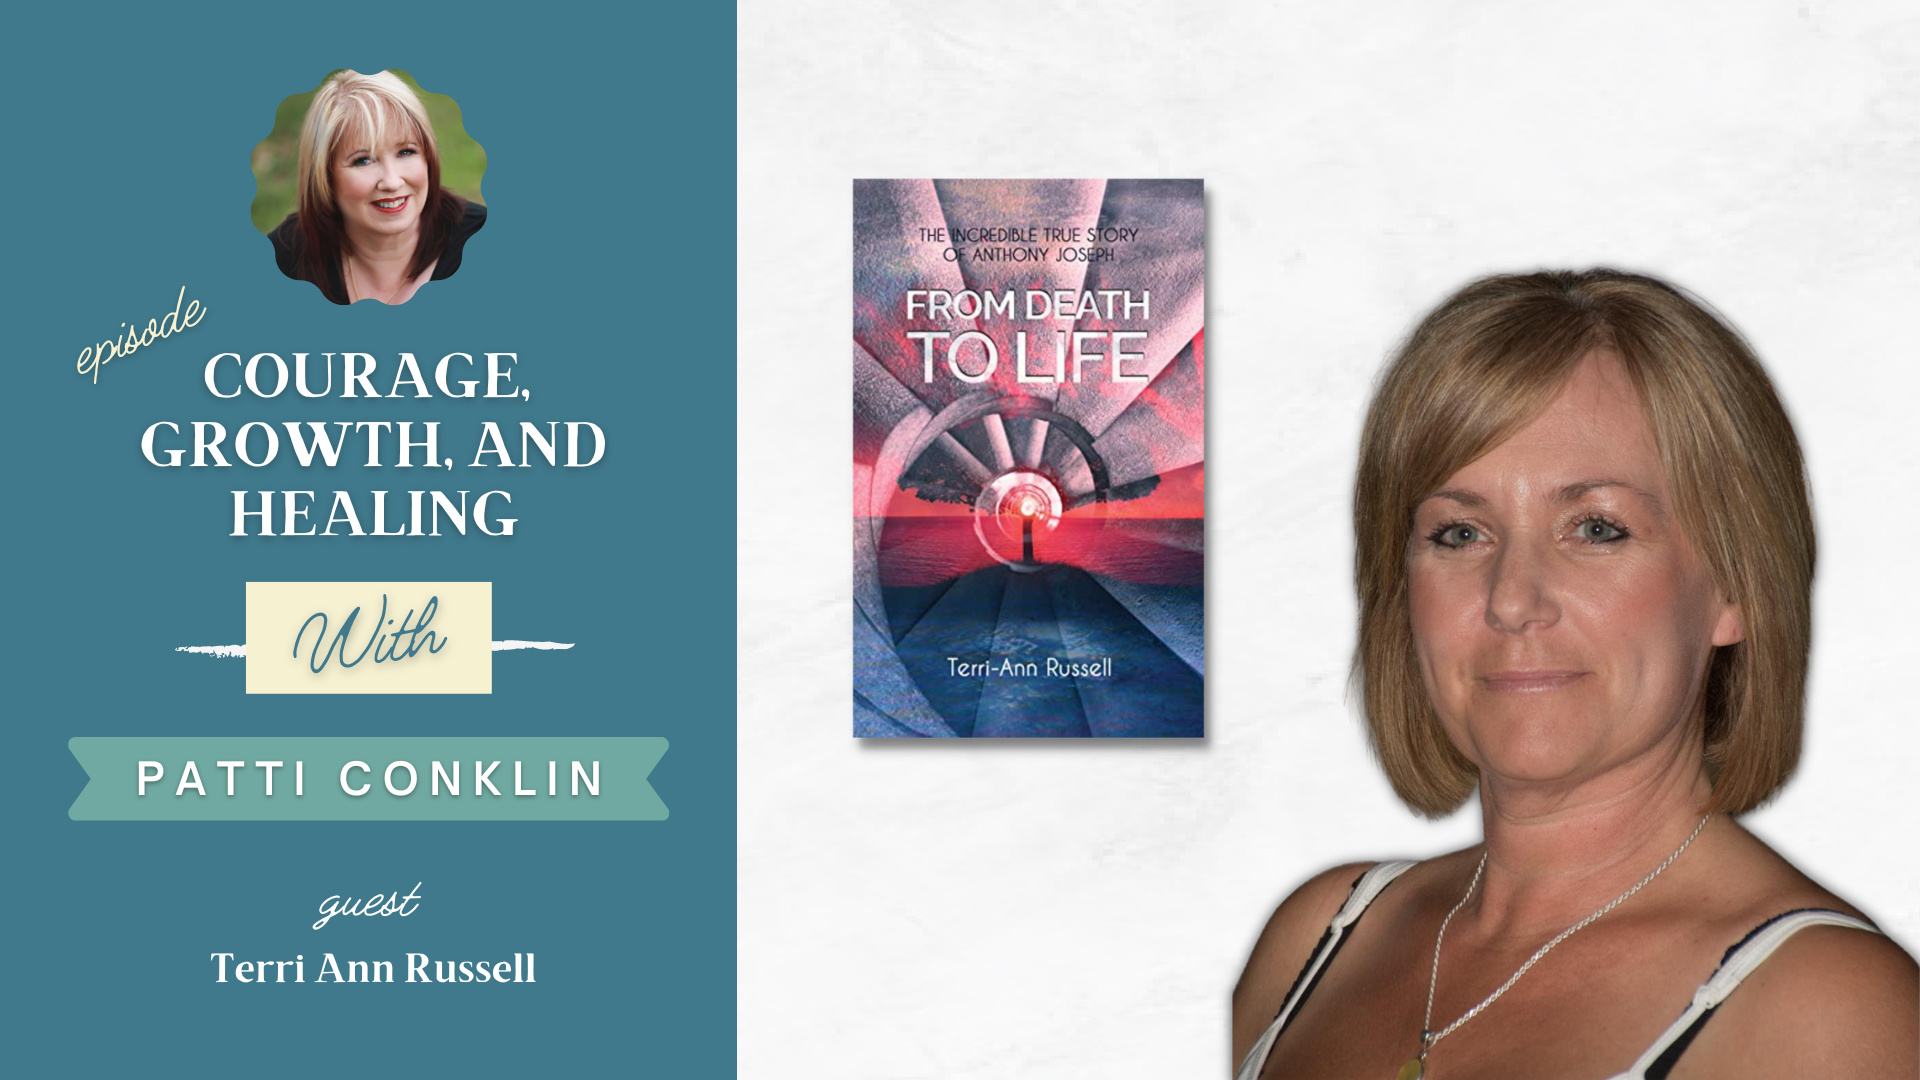 PREMIERE: Courage, Growth and Healing with guest Terri Ann Russell and host Patti Conklin